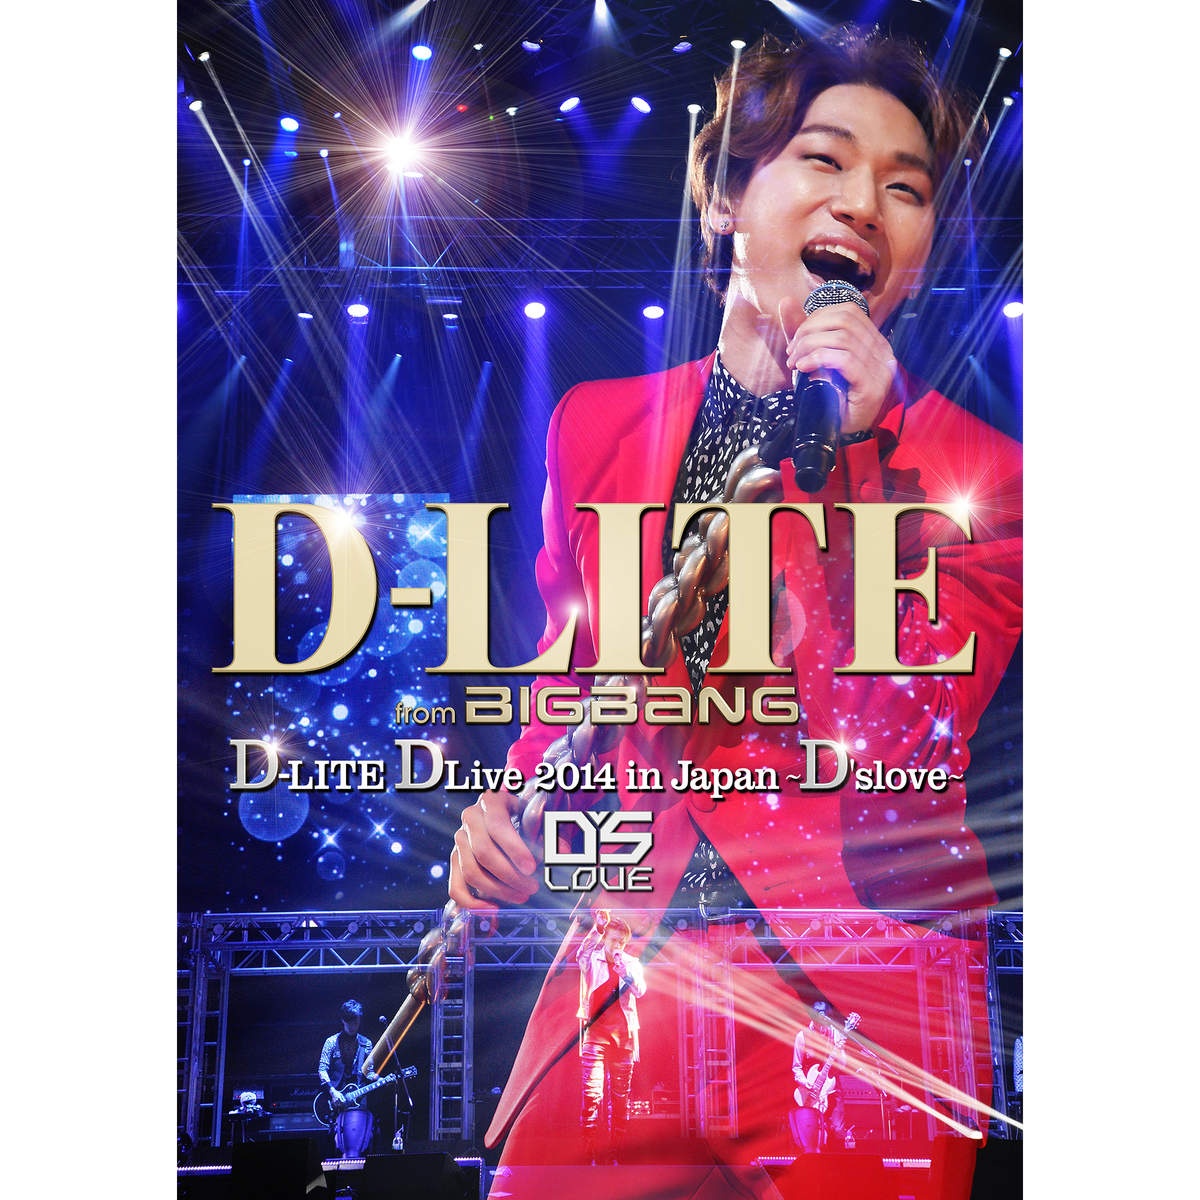 xing mian DLITE DLive 2014 in Japan D' slove